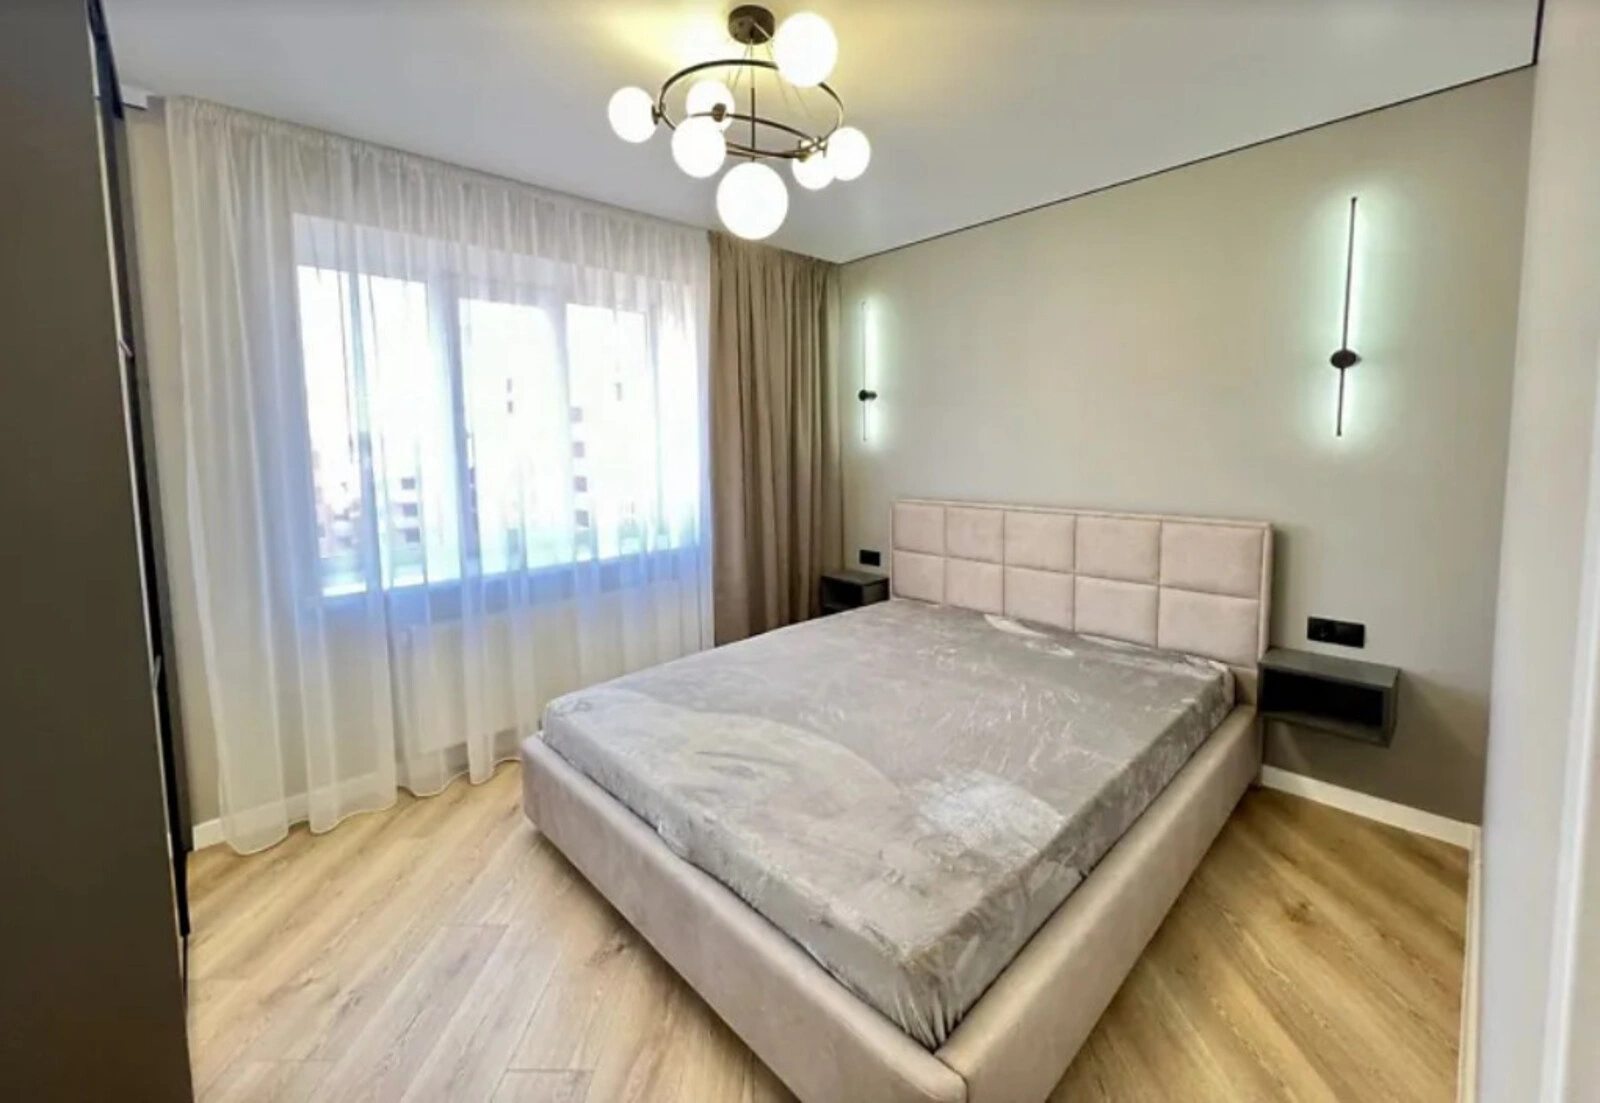 Apartments for sale. 1 room, 44 m², 9th floor/10 floors. Bam, Ternopil. 